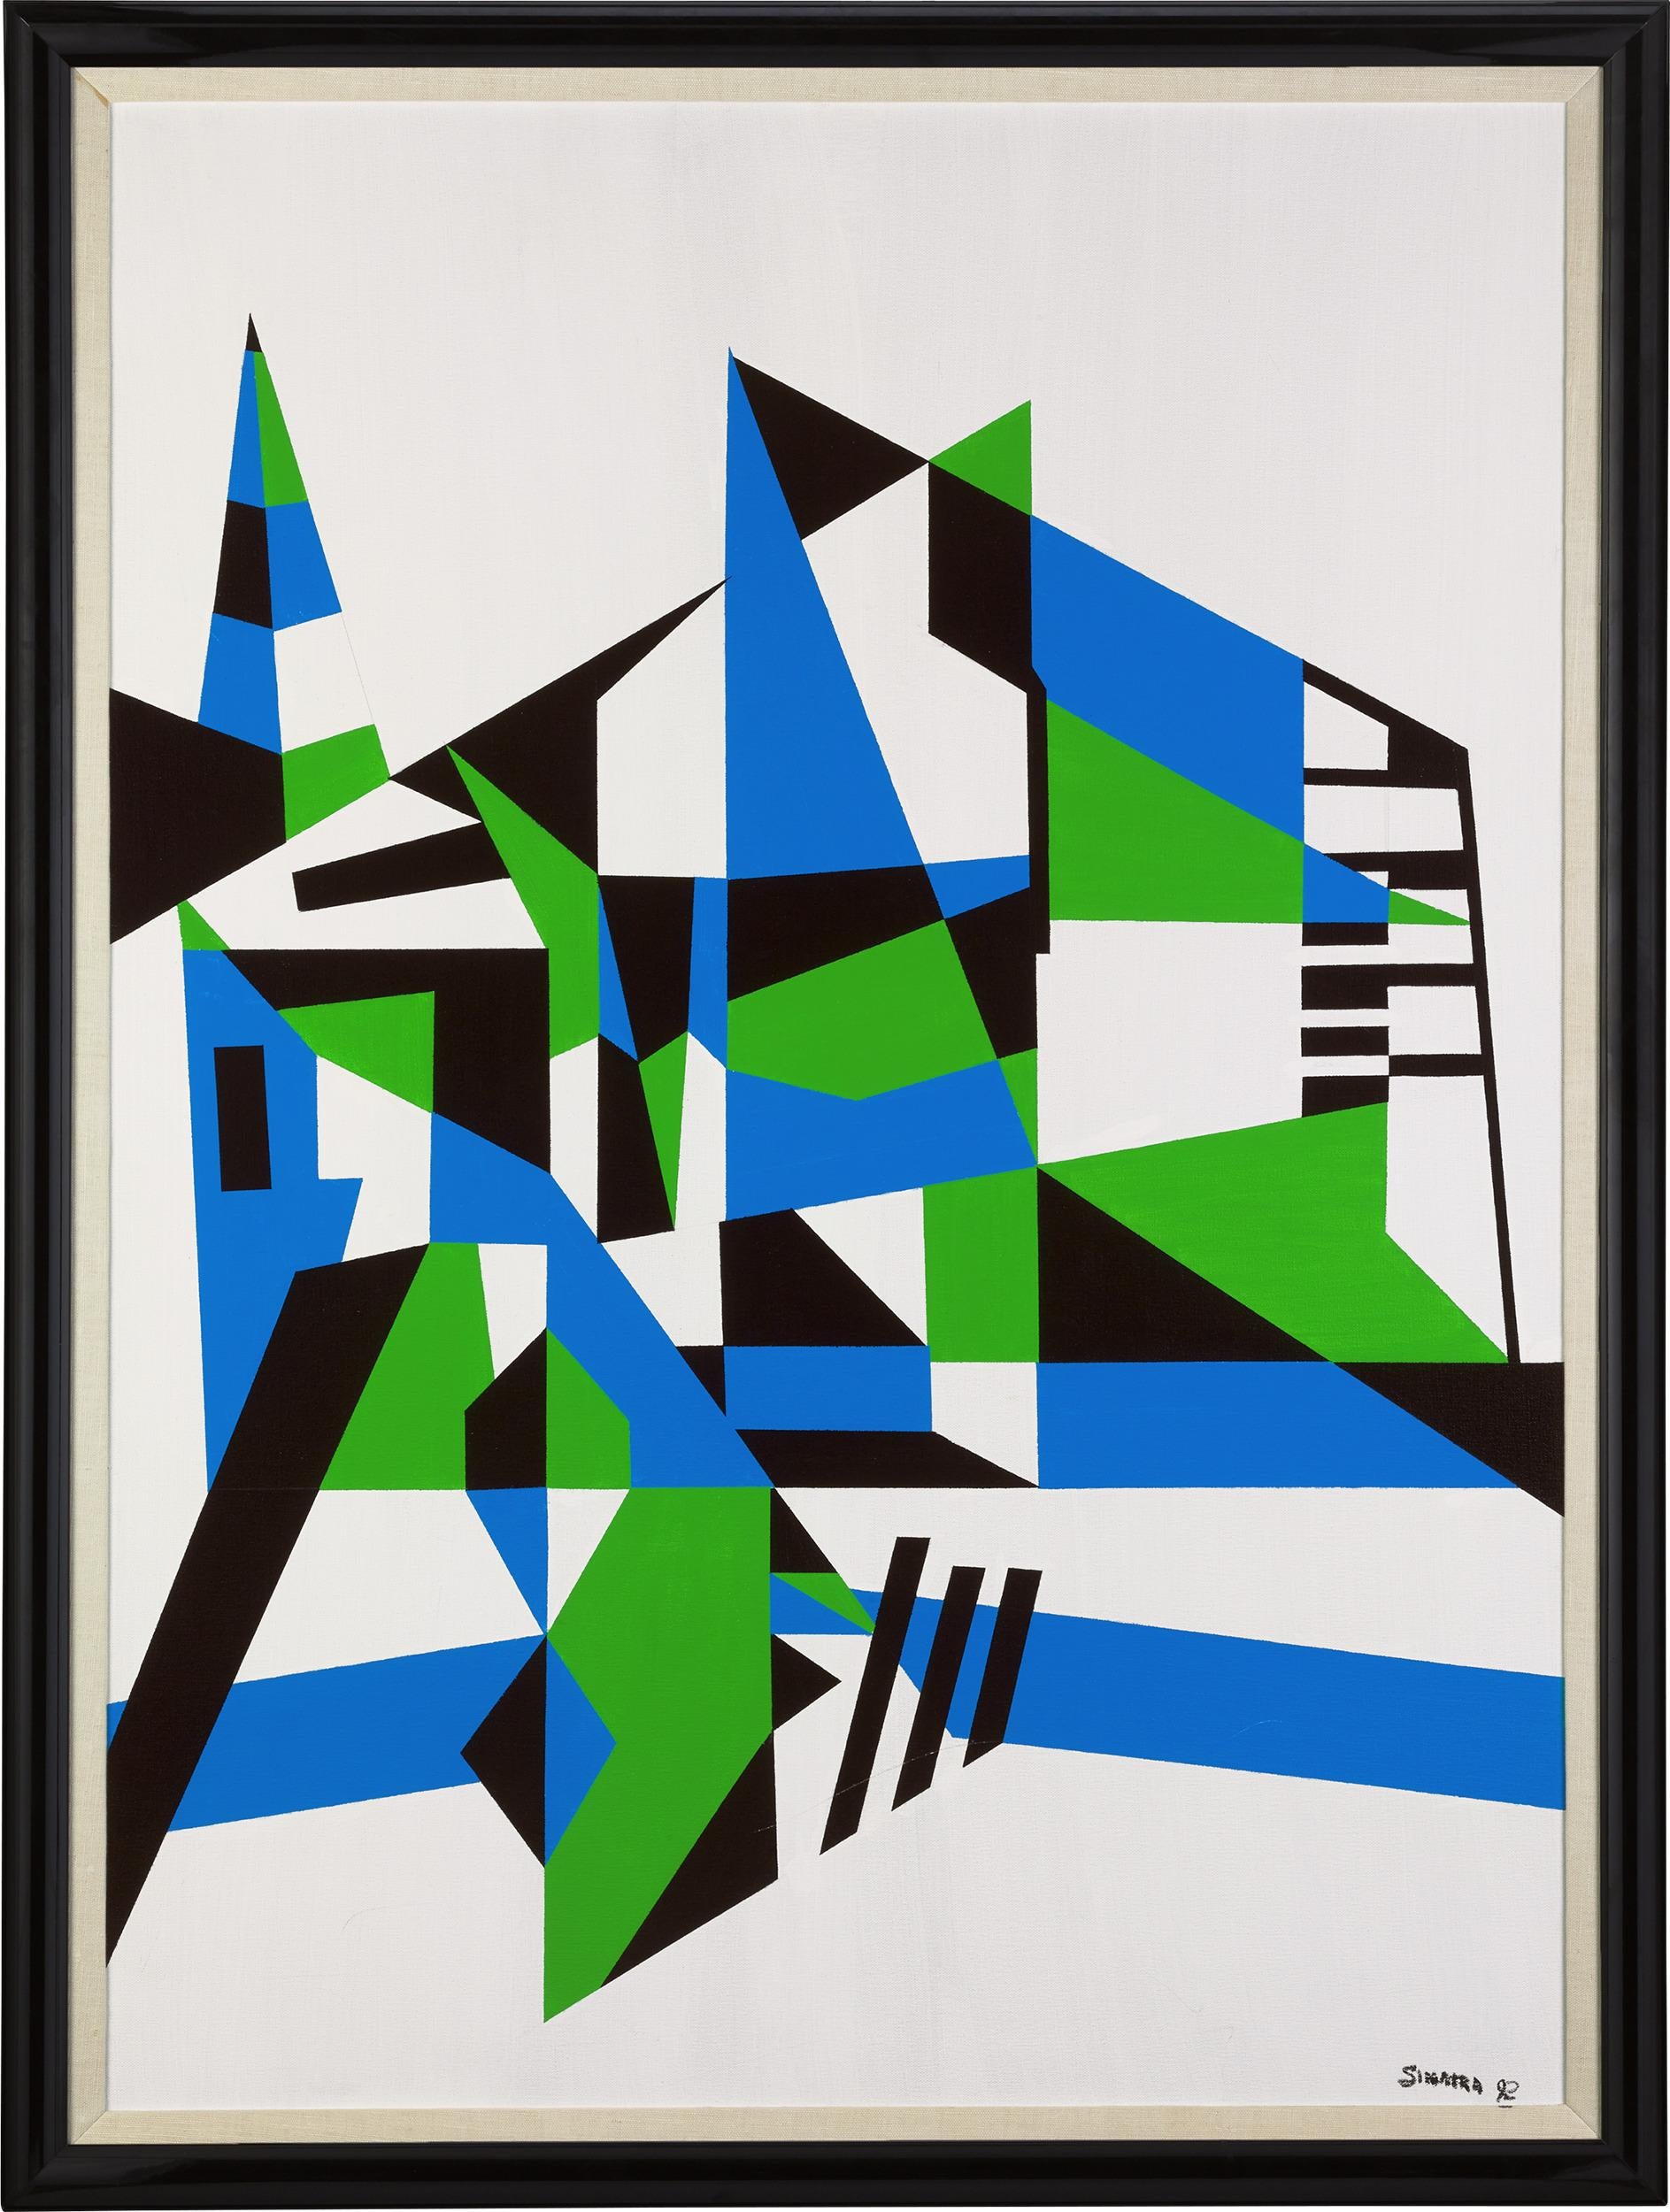 Frank Sinatra
1915-1998  American

Shapes in Green, Blue, and Black

Signed and dated 